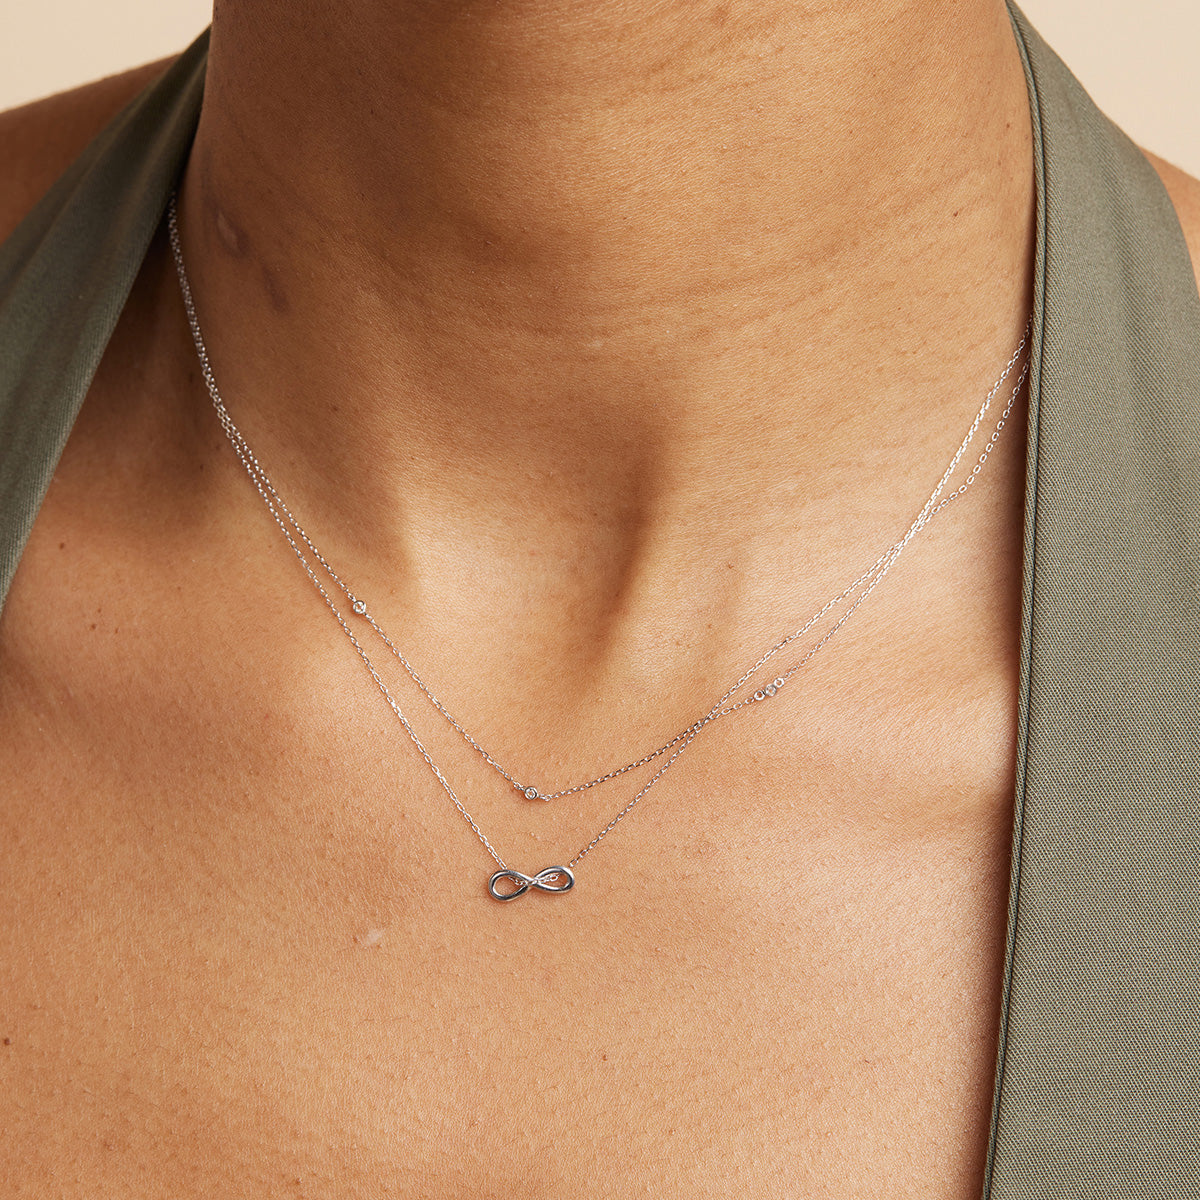 Infinite Pendant Necklace in Solid White Gold